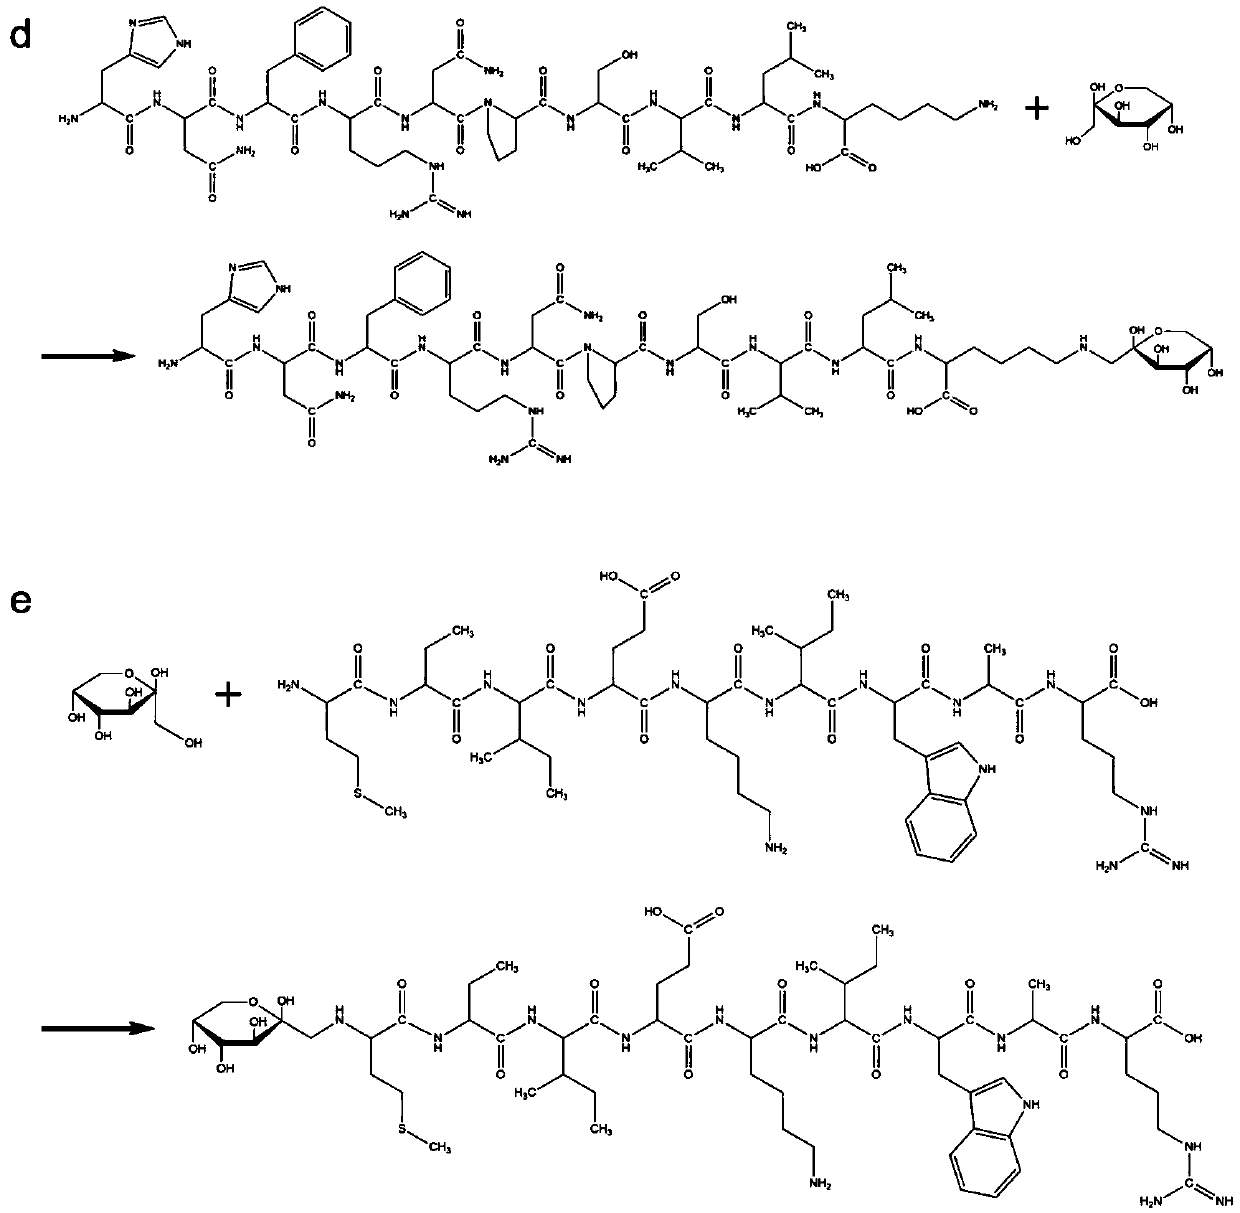 Common and convenient epitope imprinting method and application of molecular imprinting polymer